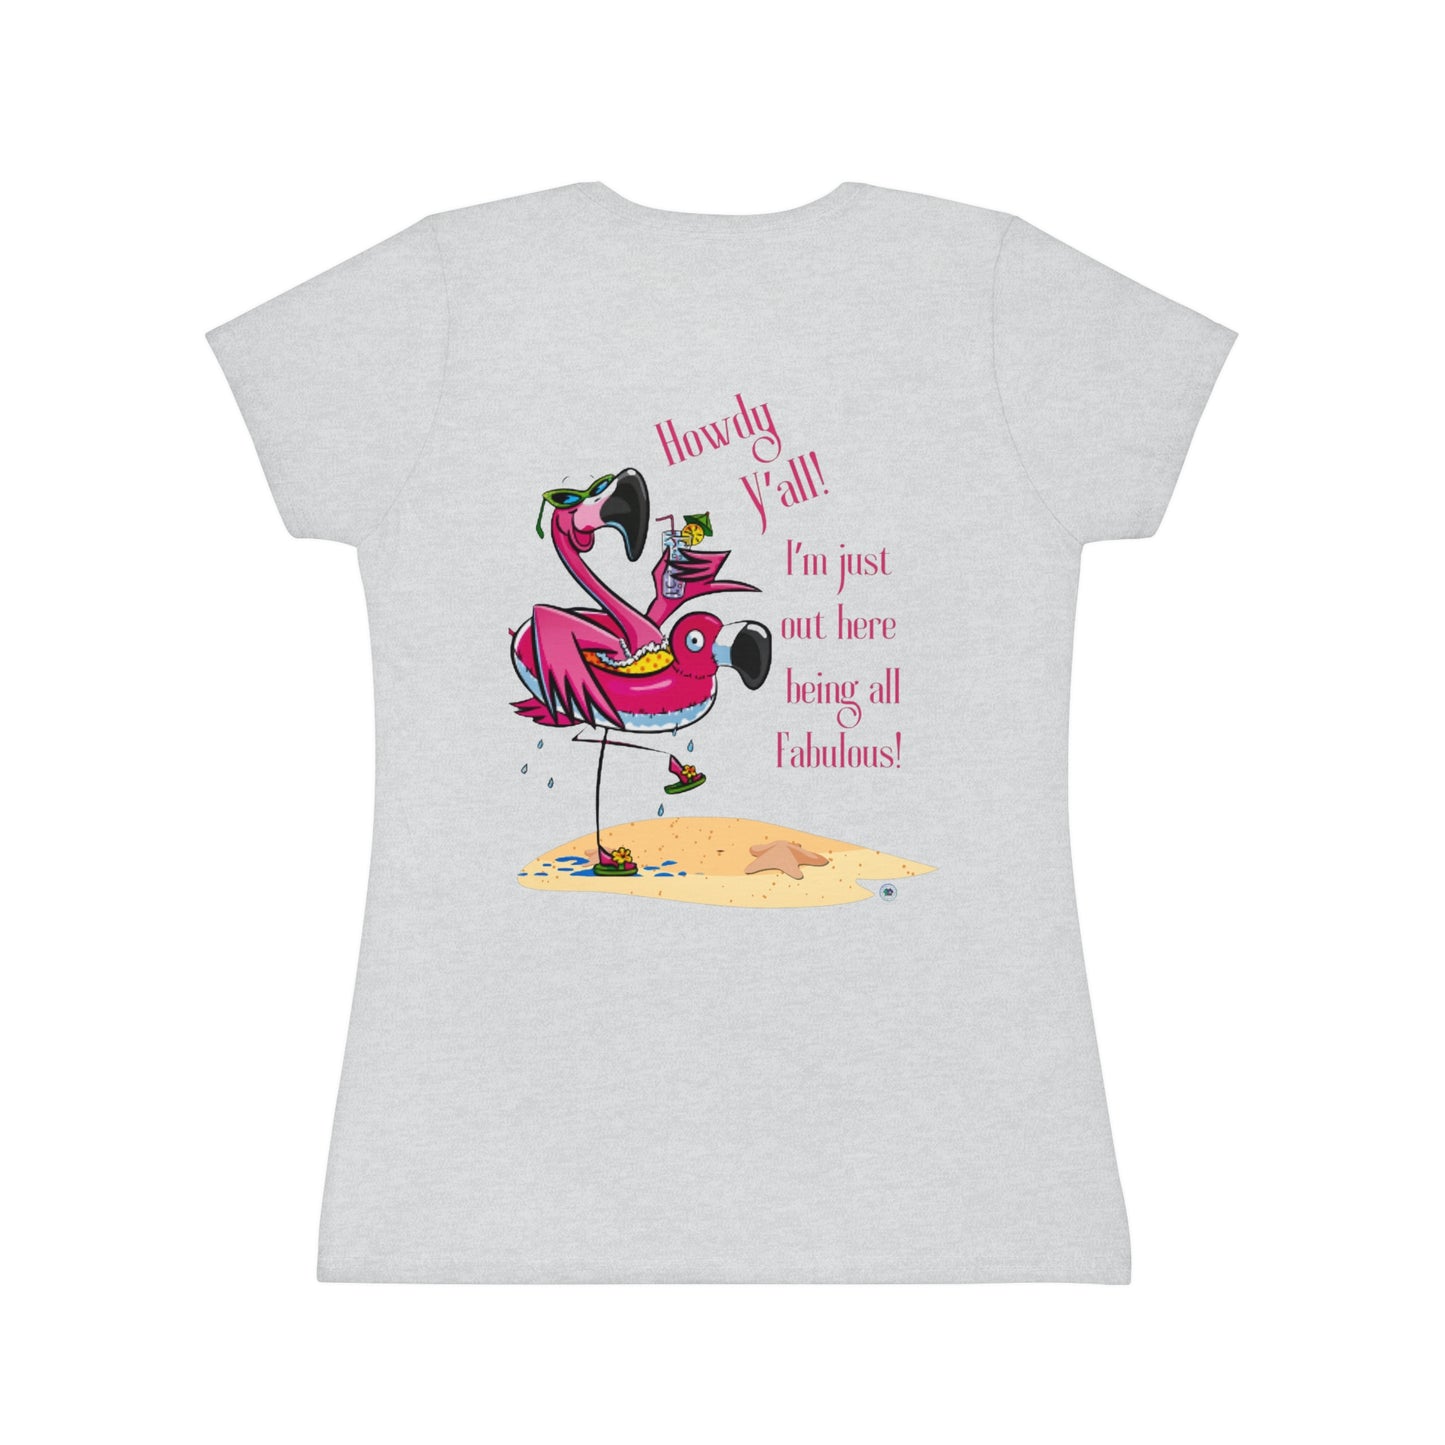 ‘Howdy Y’all! I’m just out here being all fabulous!’ Printed Front & Back.  Iconic T-Shirt